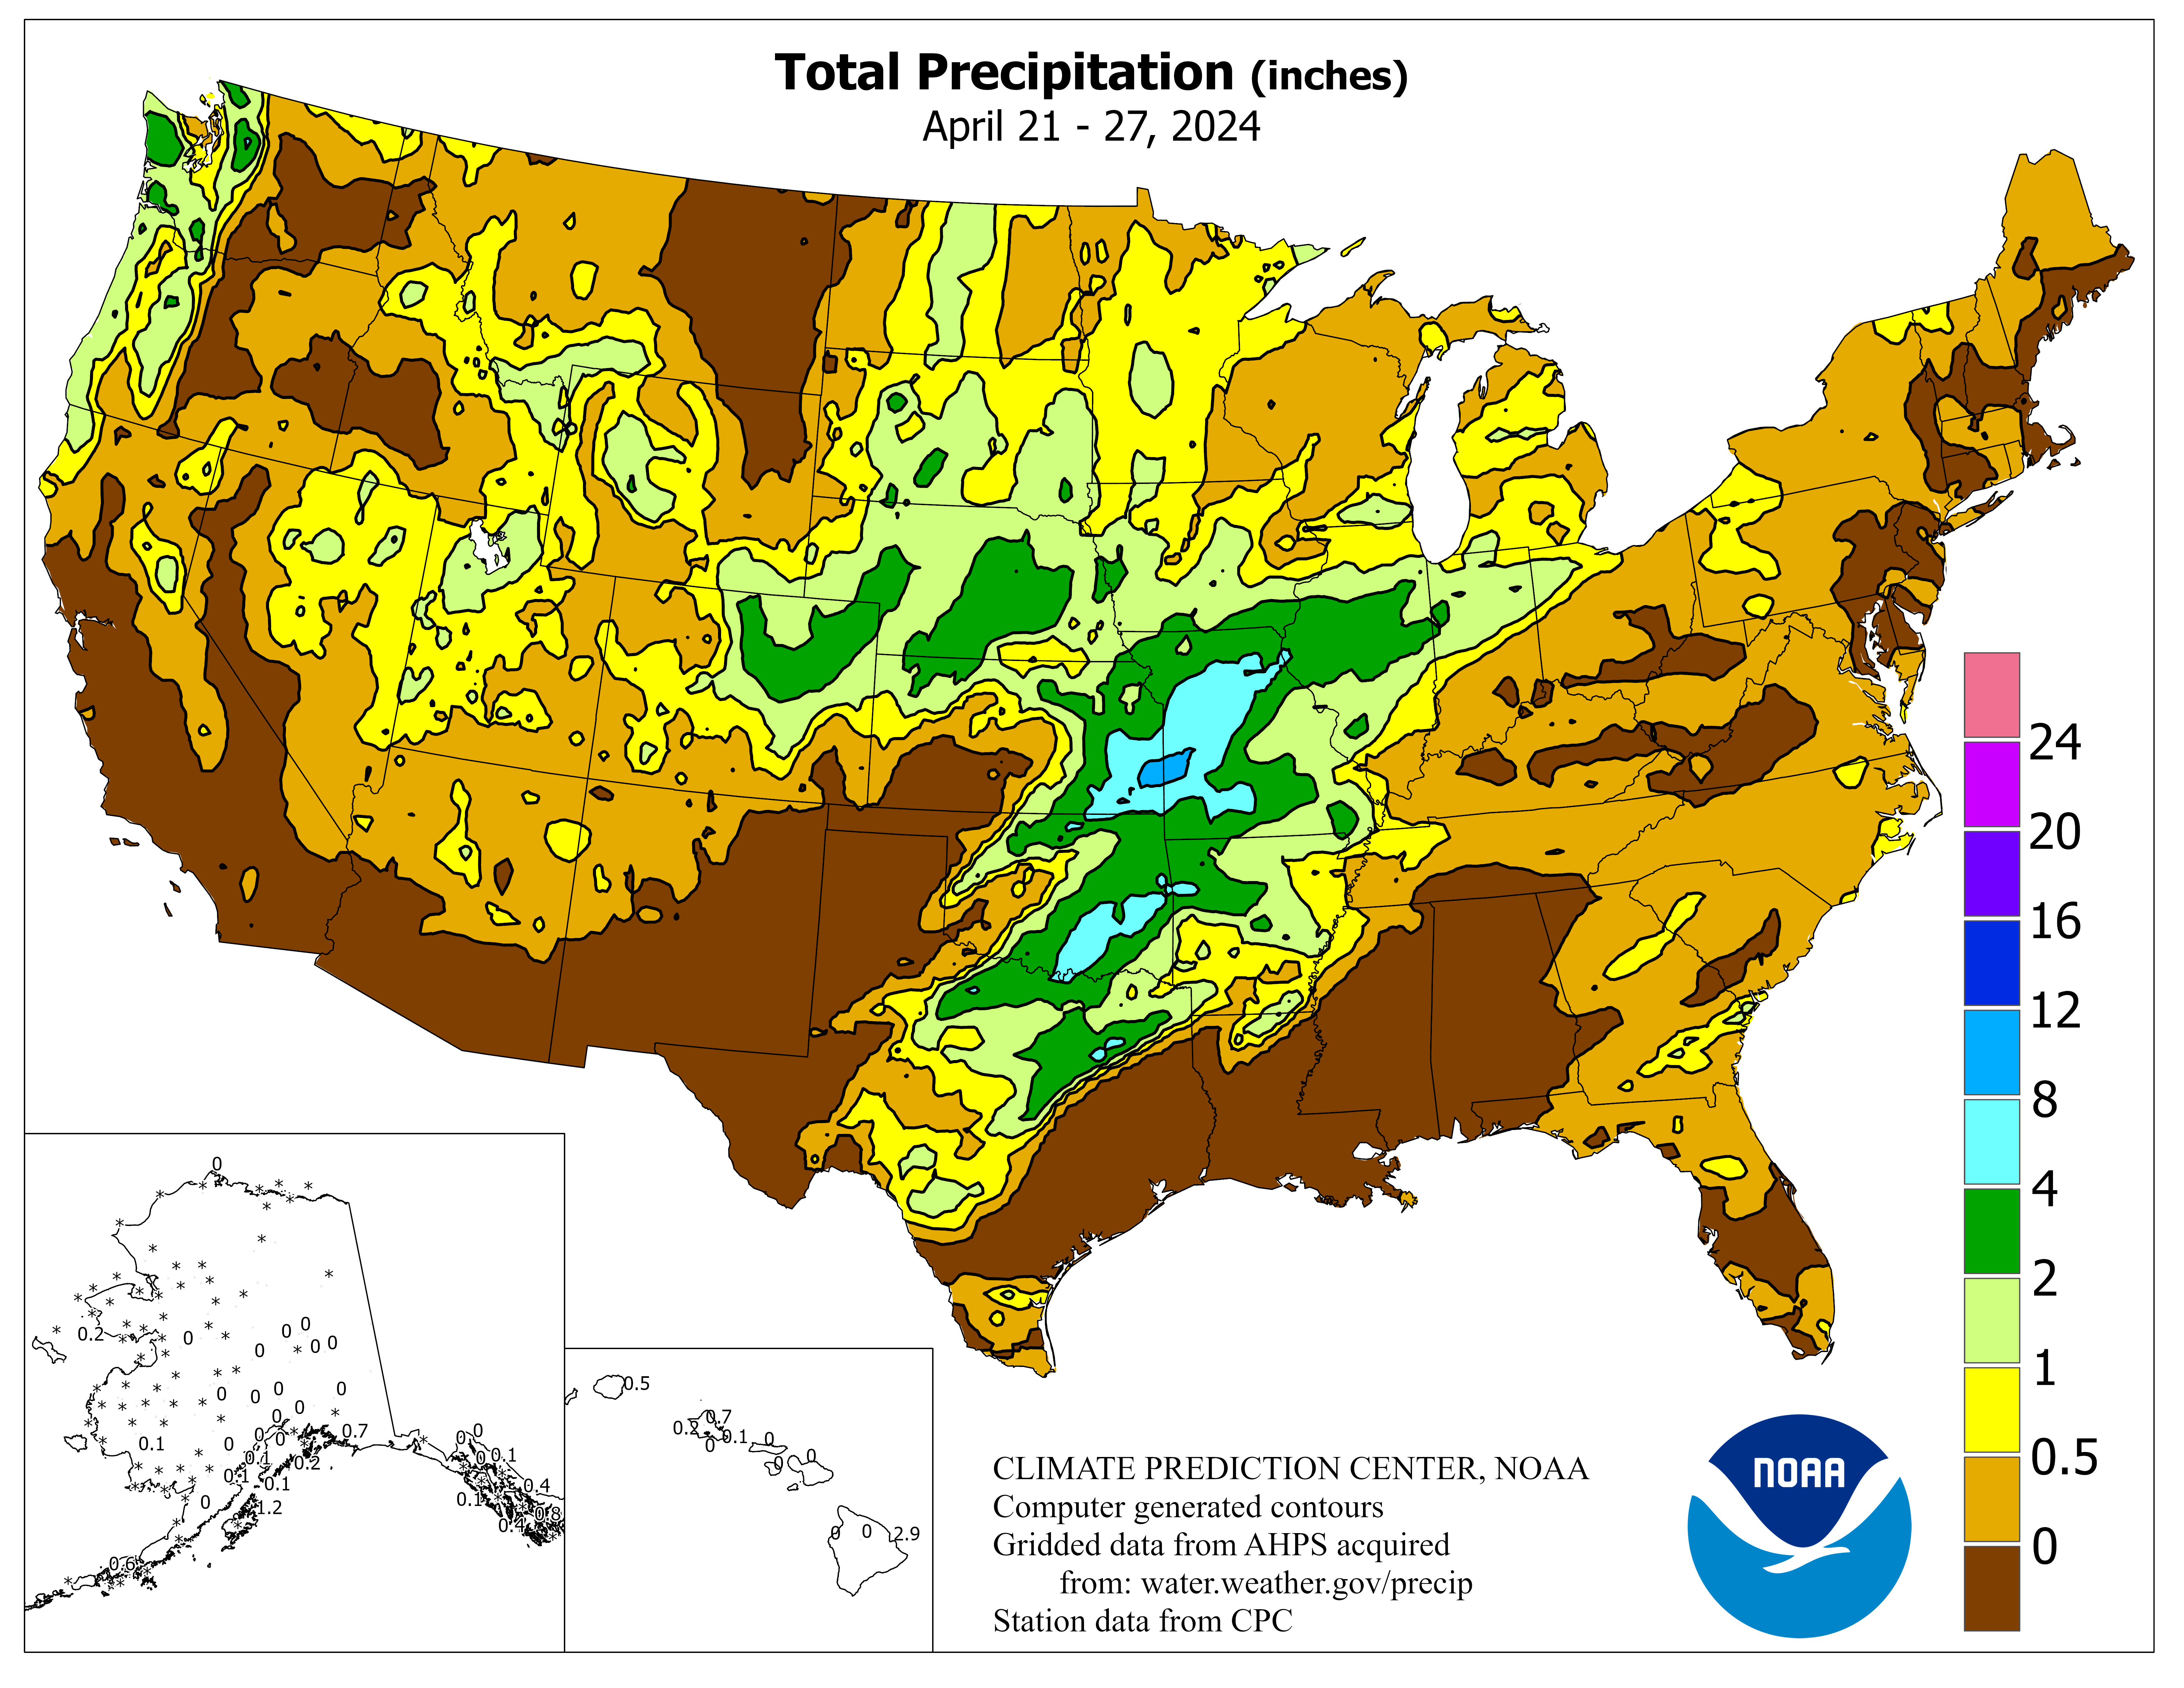 United States Weekly Total Precipitation Graphic